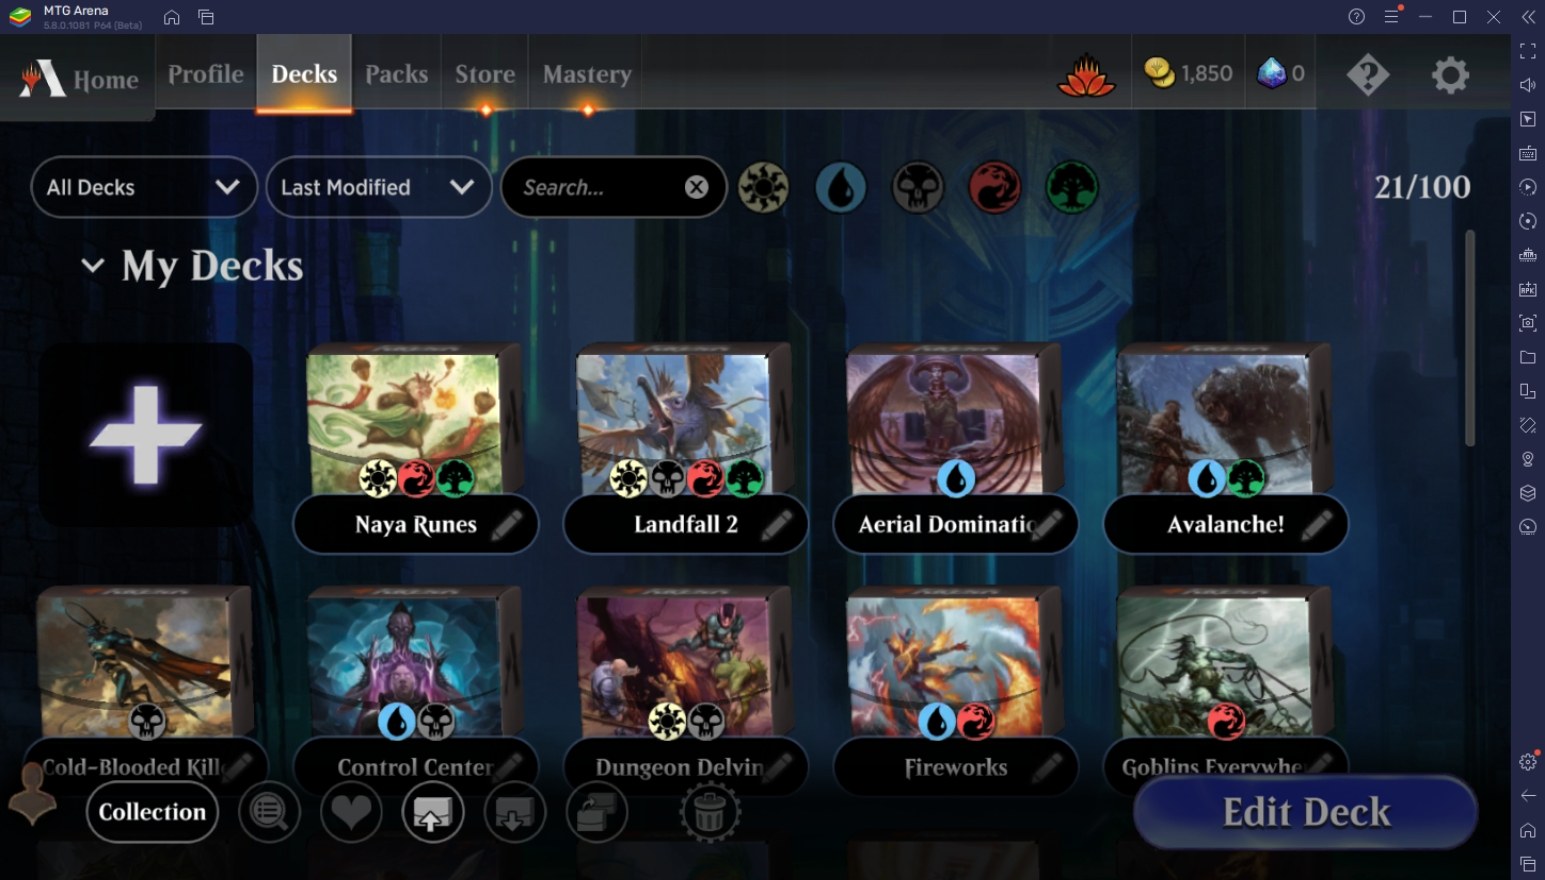 Magic: The Gathering Arena APK Download for Android Free